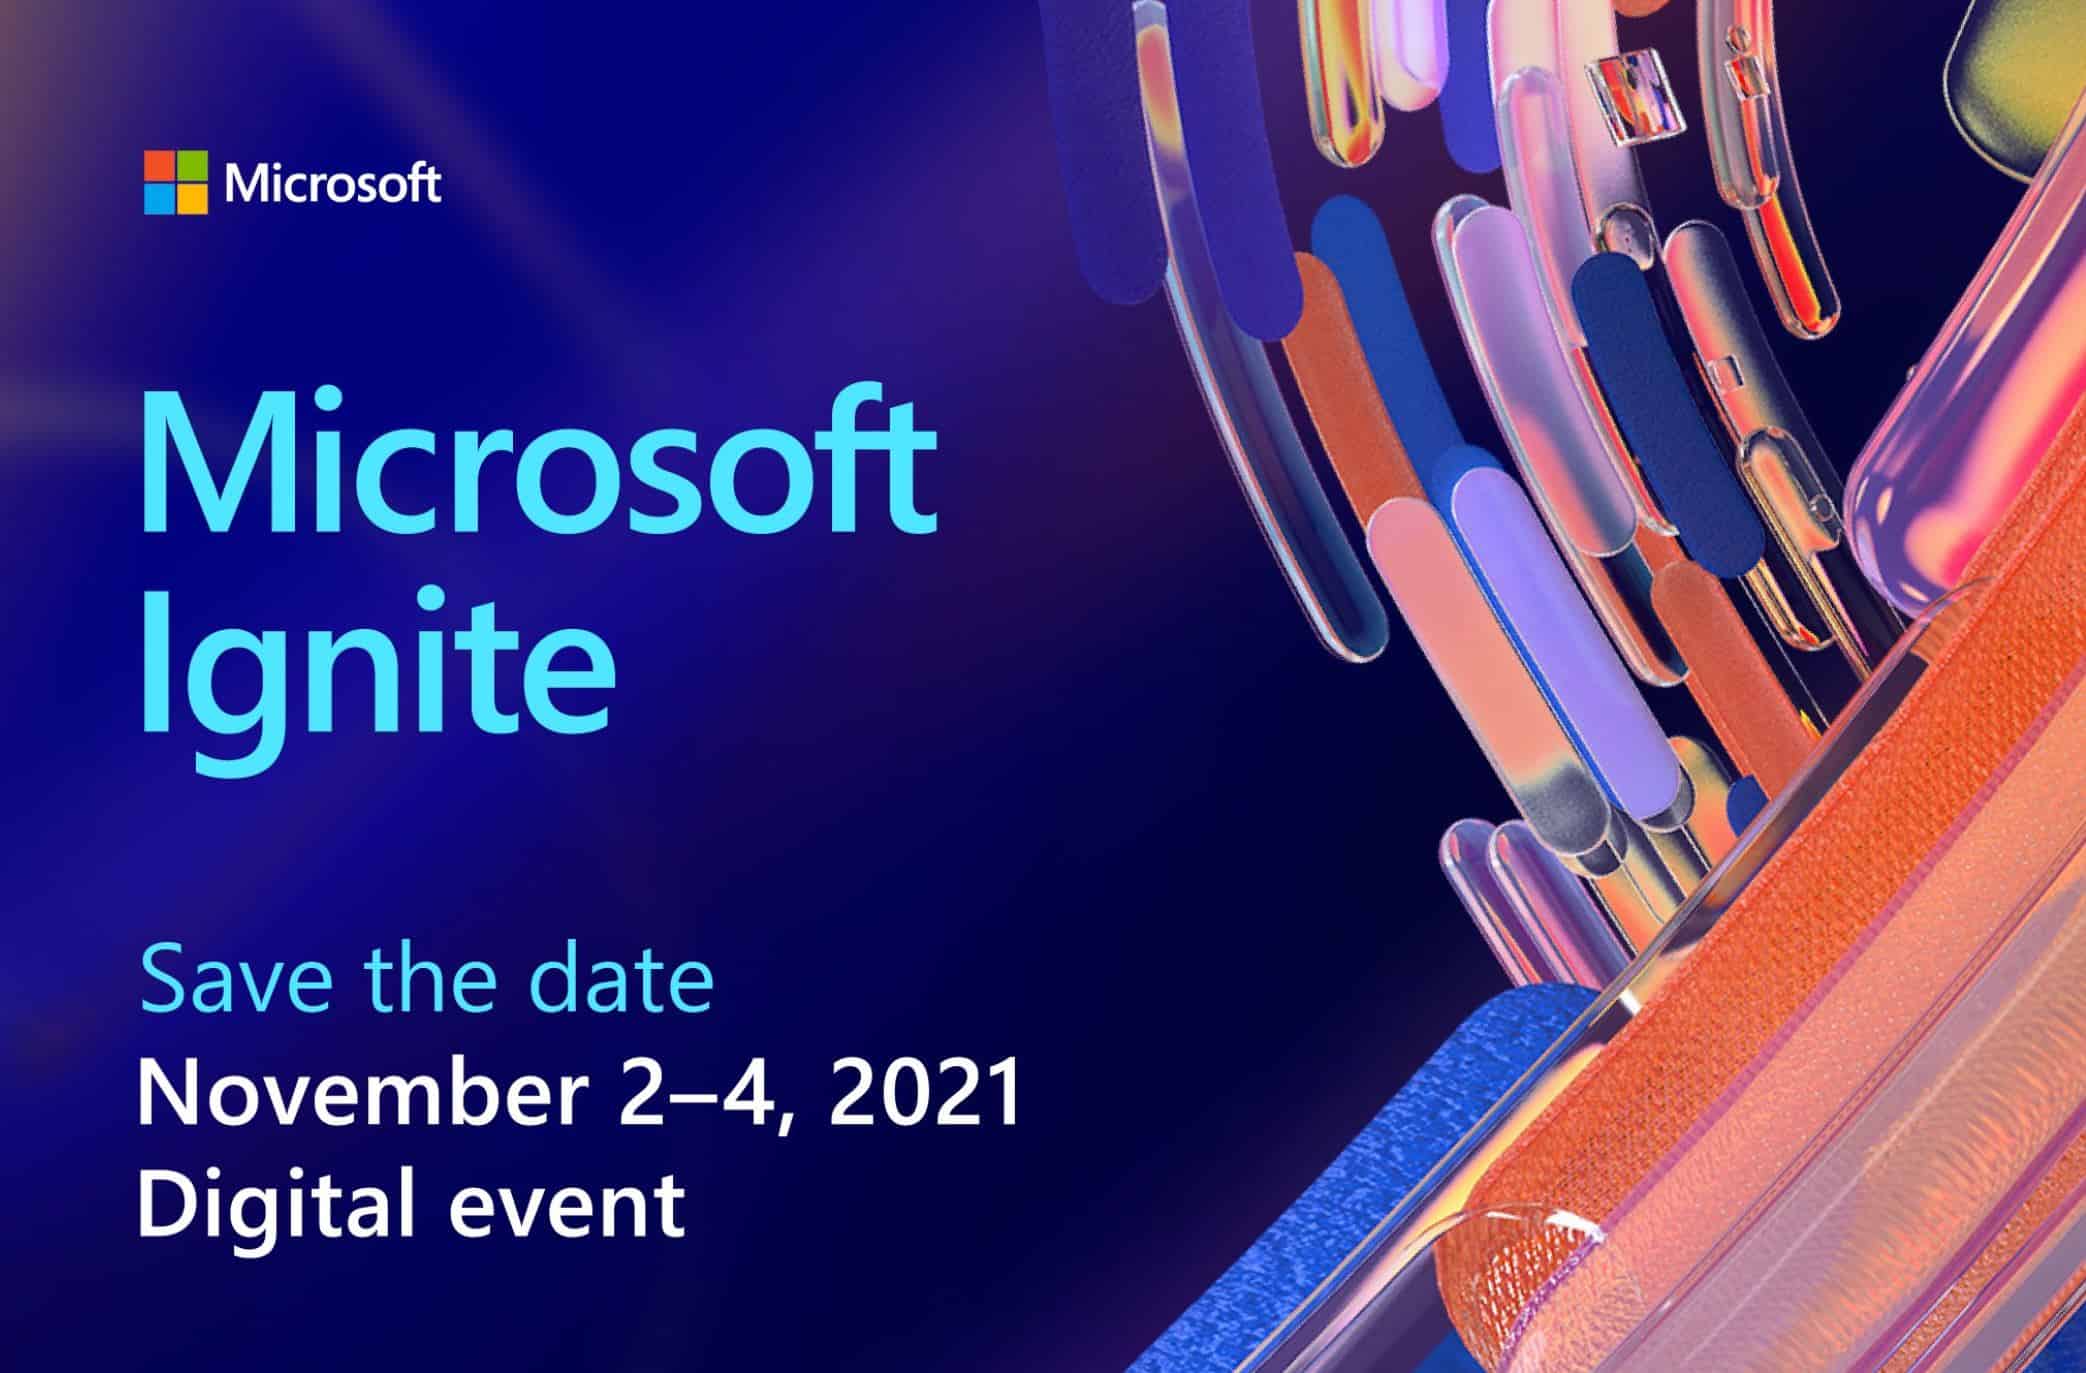 Microsoft Ignite conference is coming digitally on November 2-4, 2021